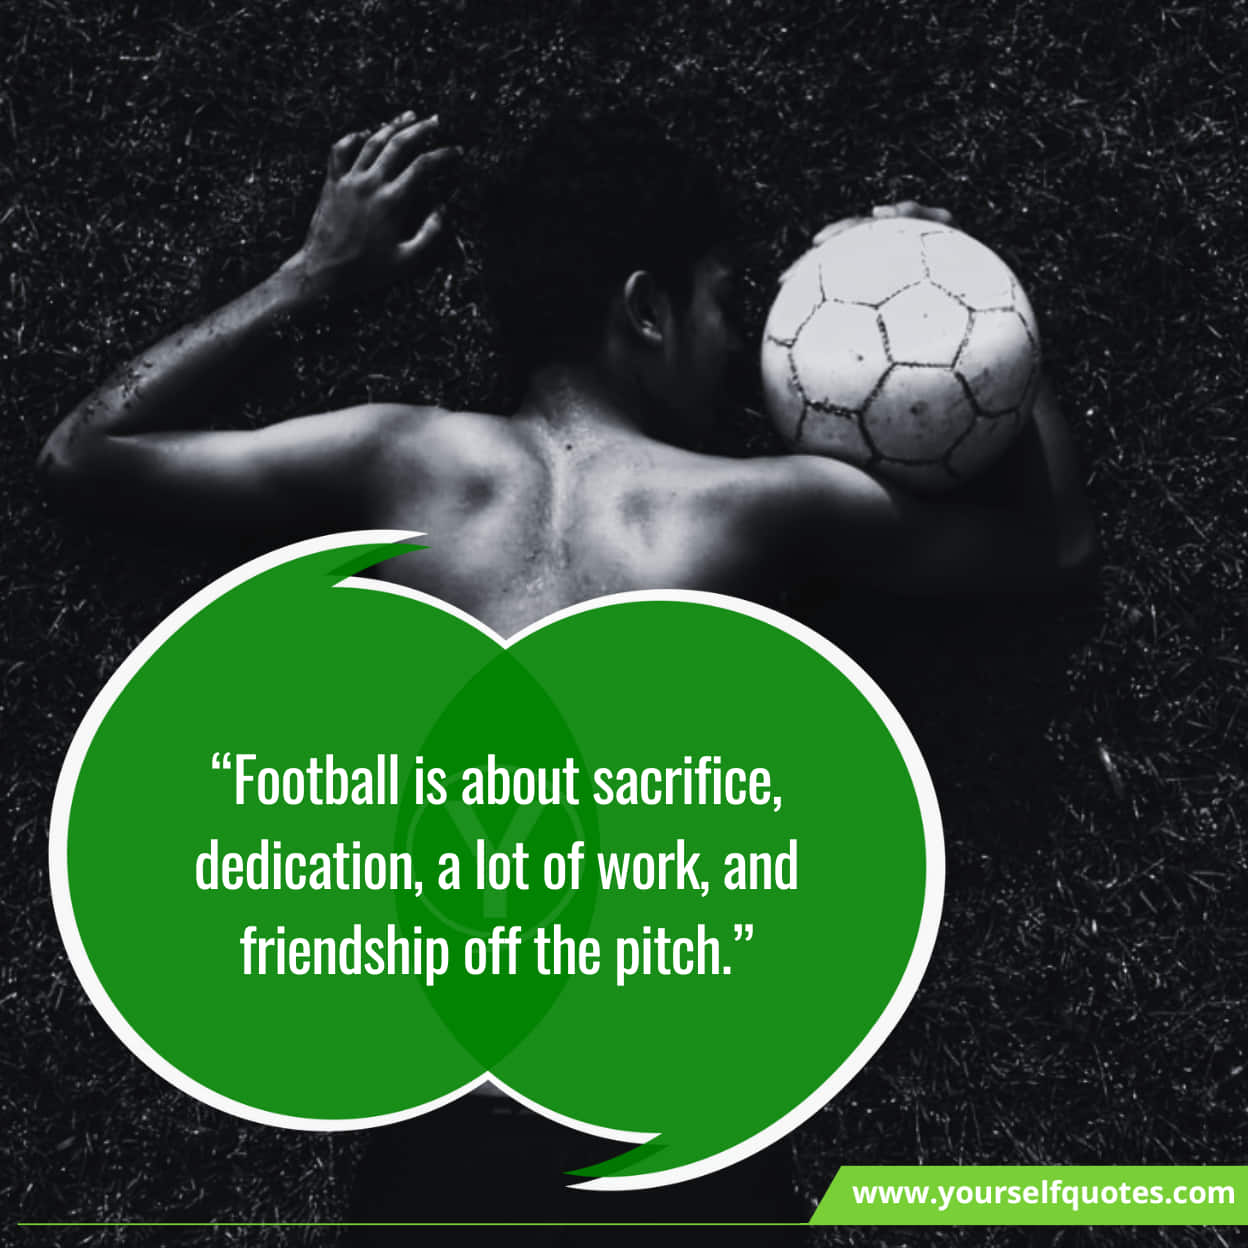 Best Football Quotes By Famous Footballers